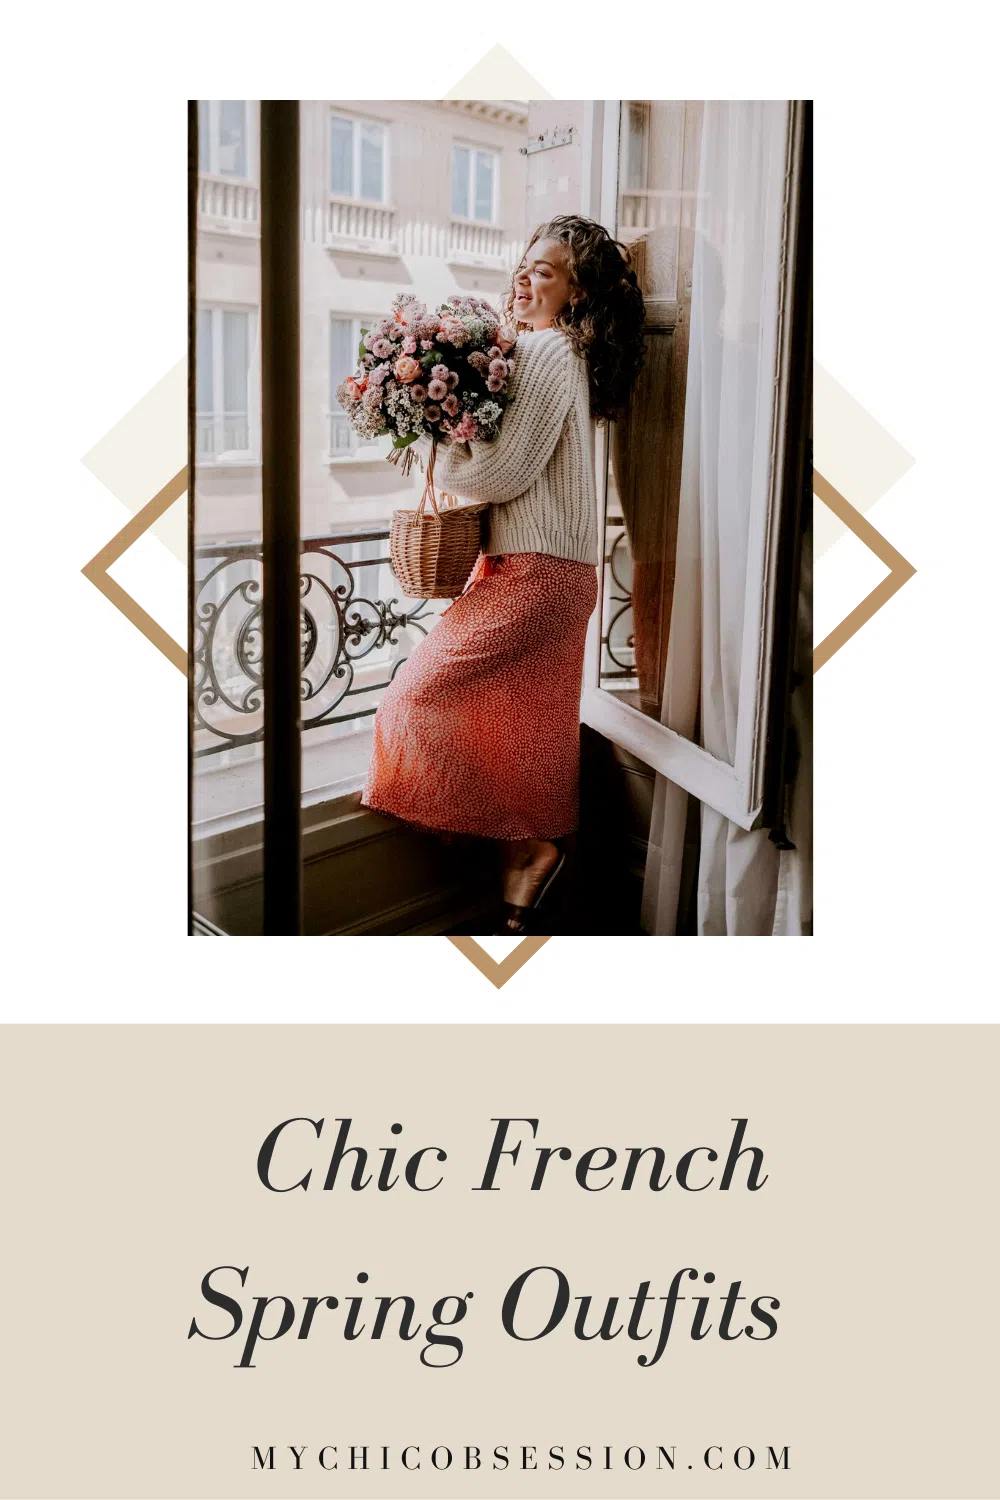 Woman wearing Red and white floral wrap dress on the balcony in Paris